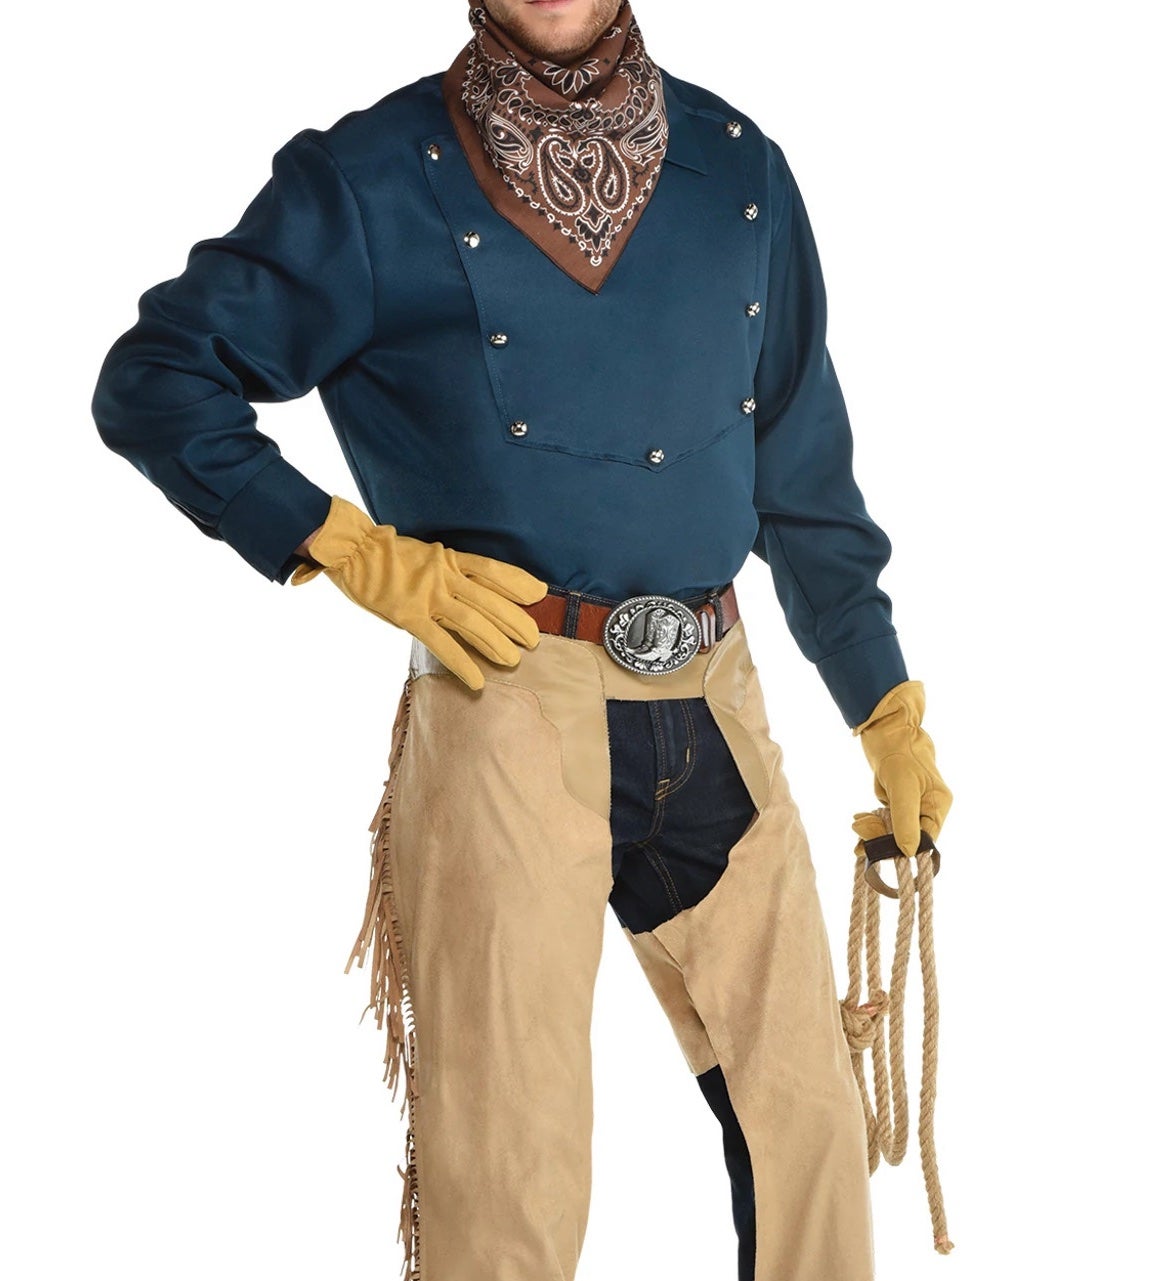 A brown bandana, yellow faux leather gloves, and a lasso